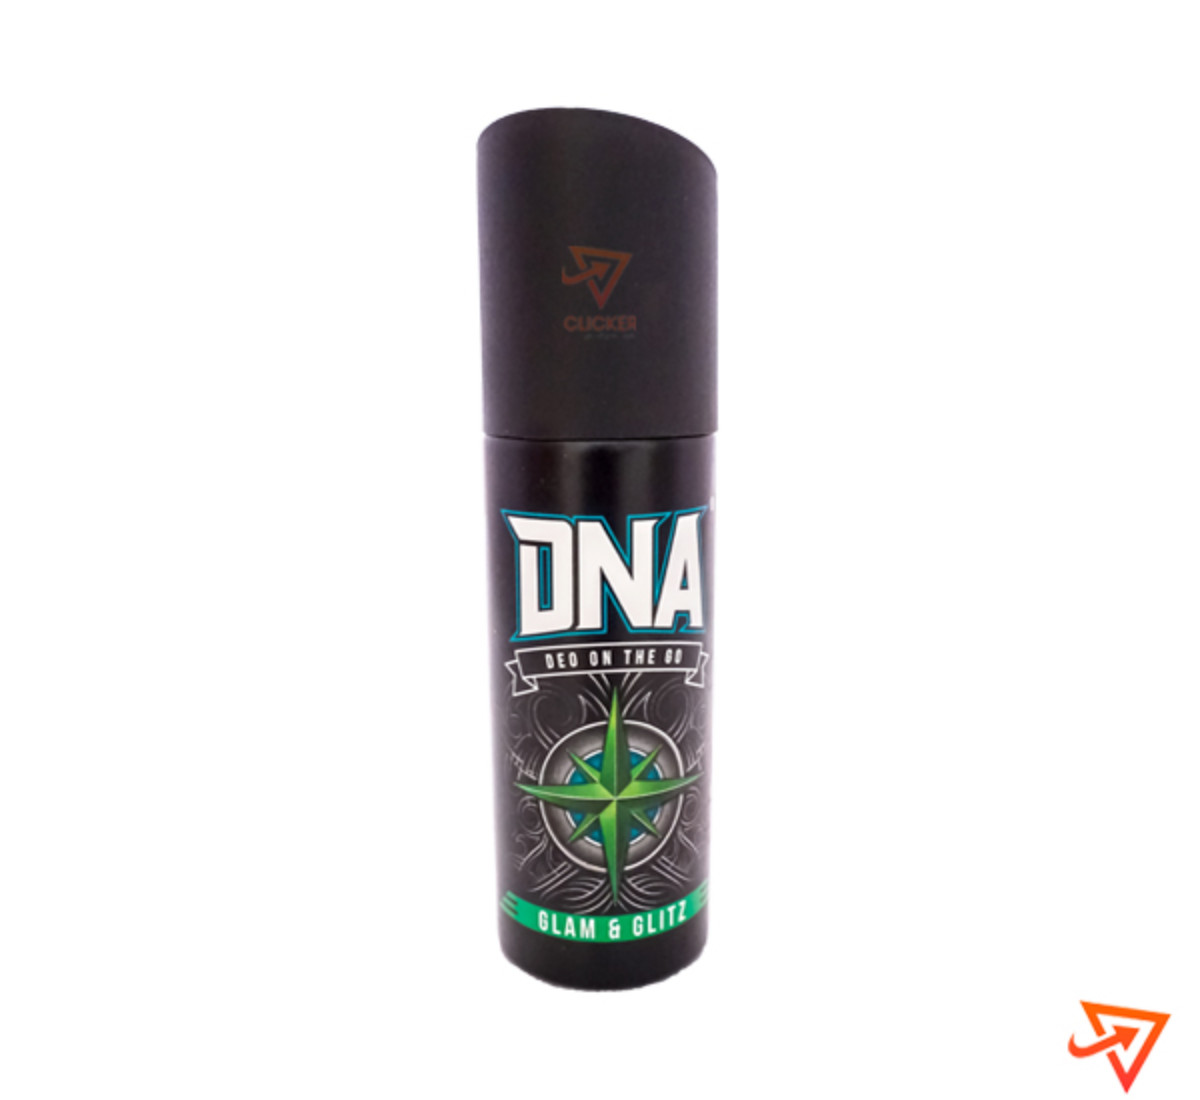 Clicker product 75ml DNA deo on the go glam &glitz 1199